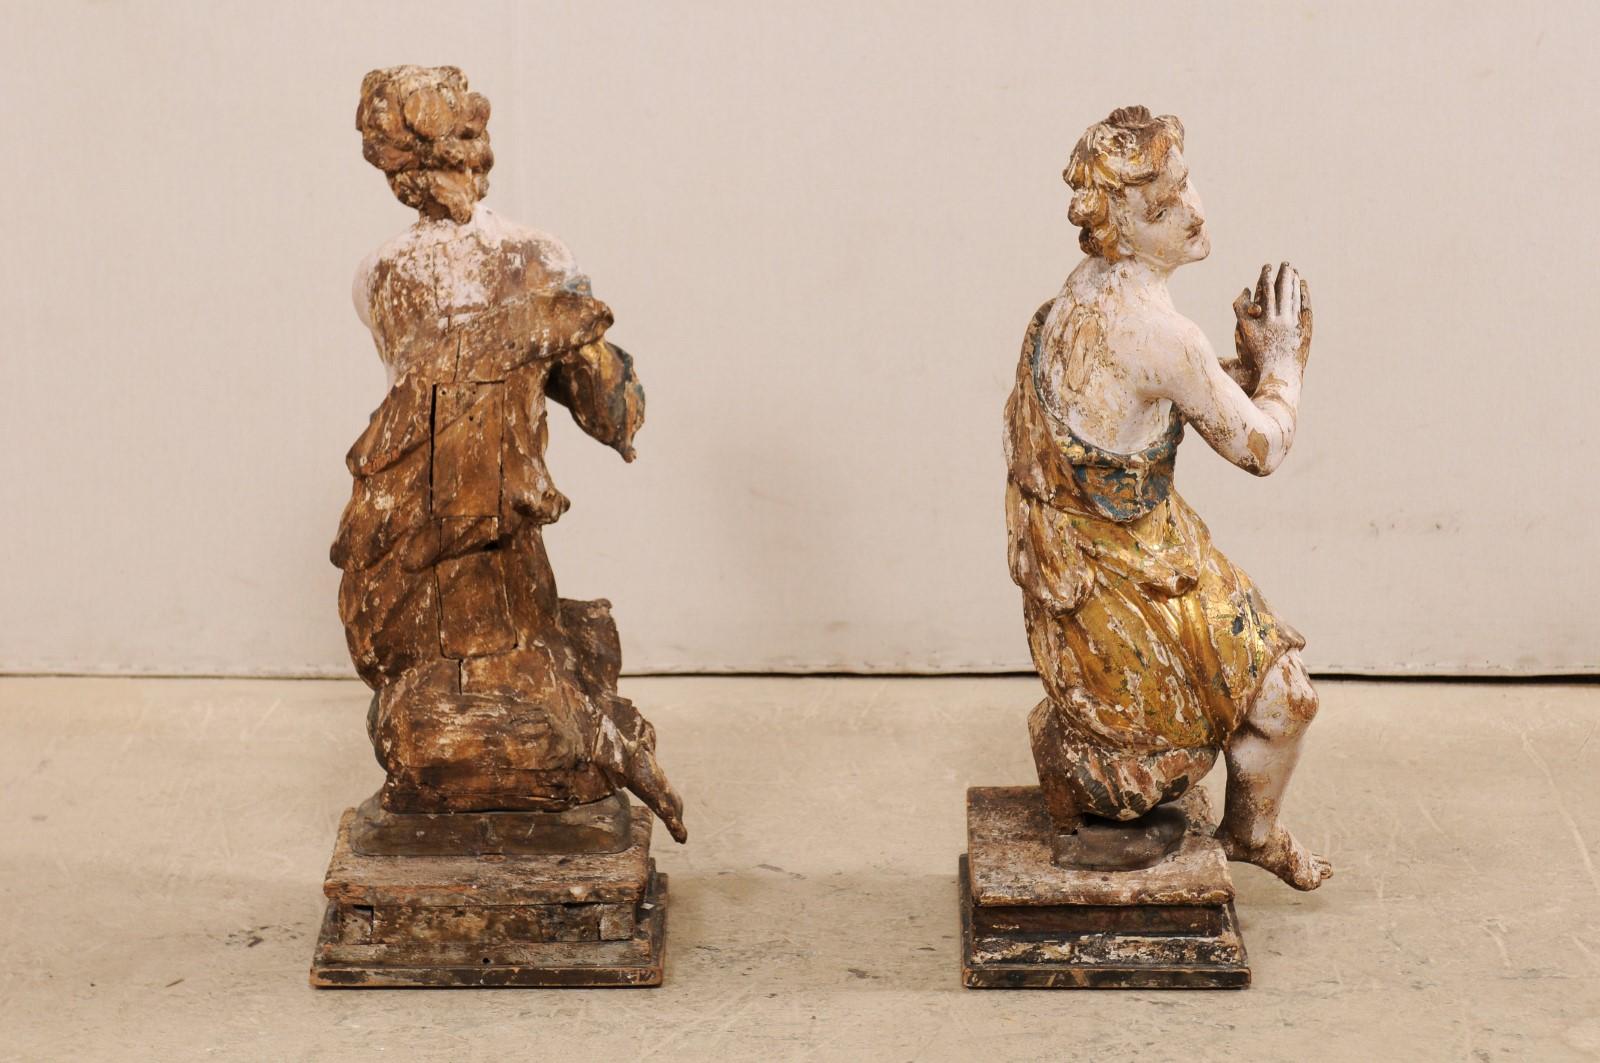 Exquisite Pair of 18th Century Italian Angelic Wood Carved Male Figures 4